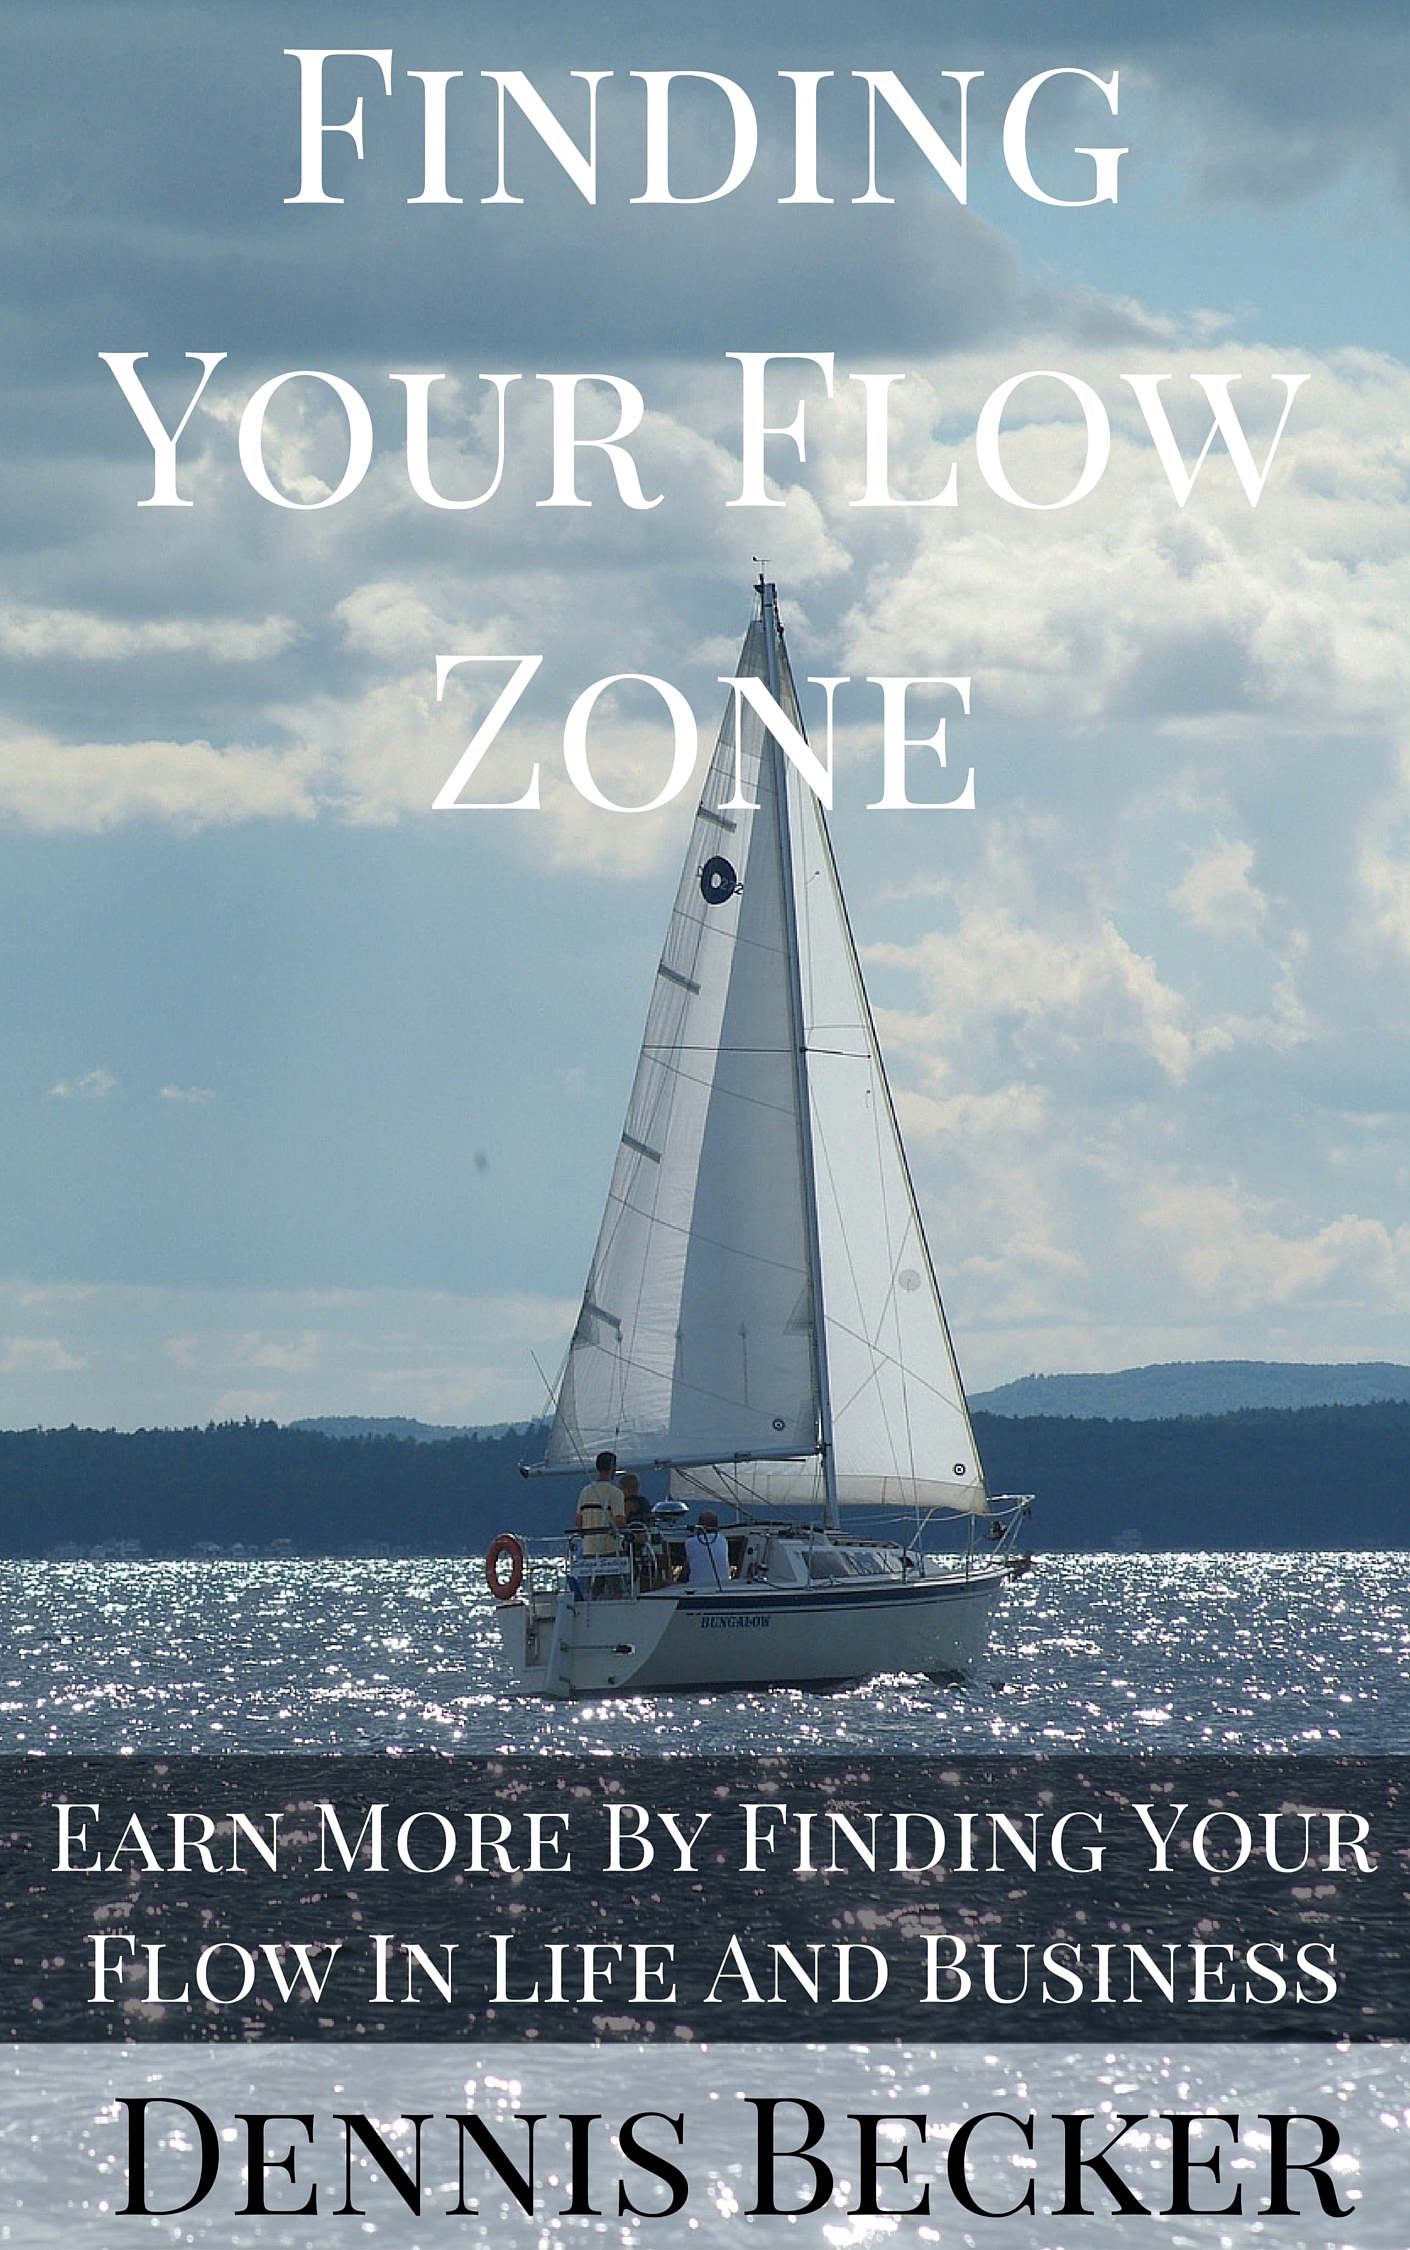 Finding Your Flow Zone